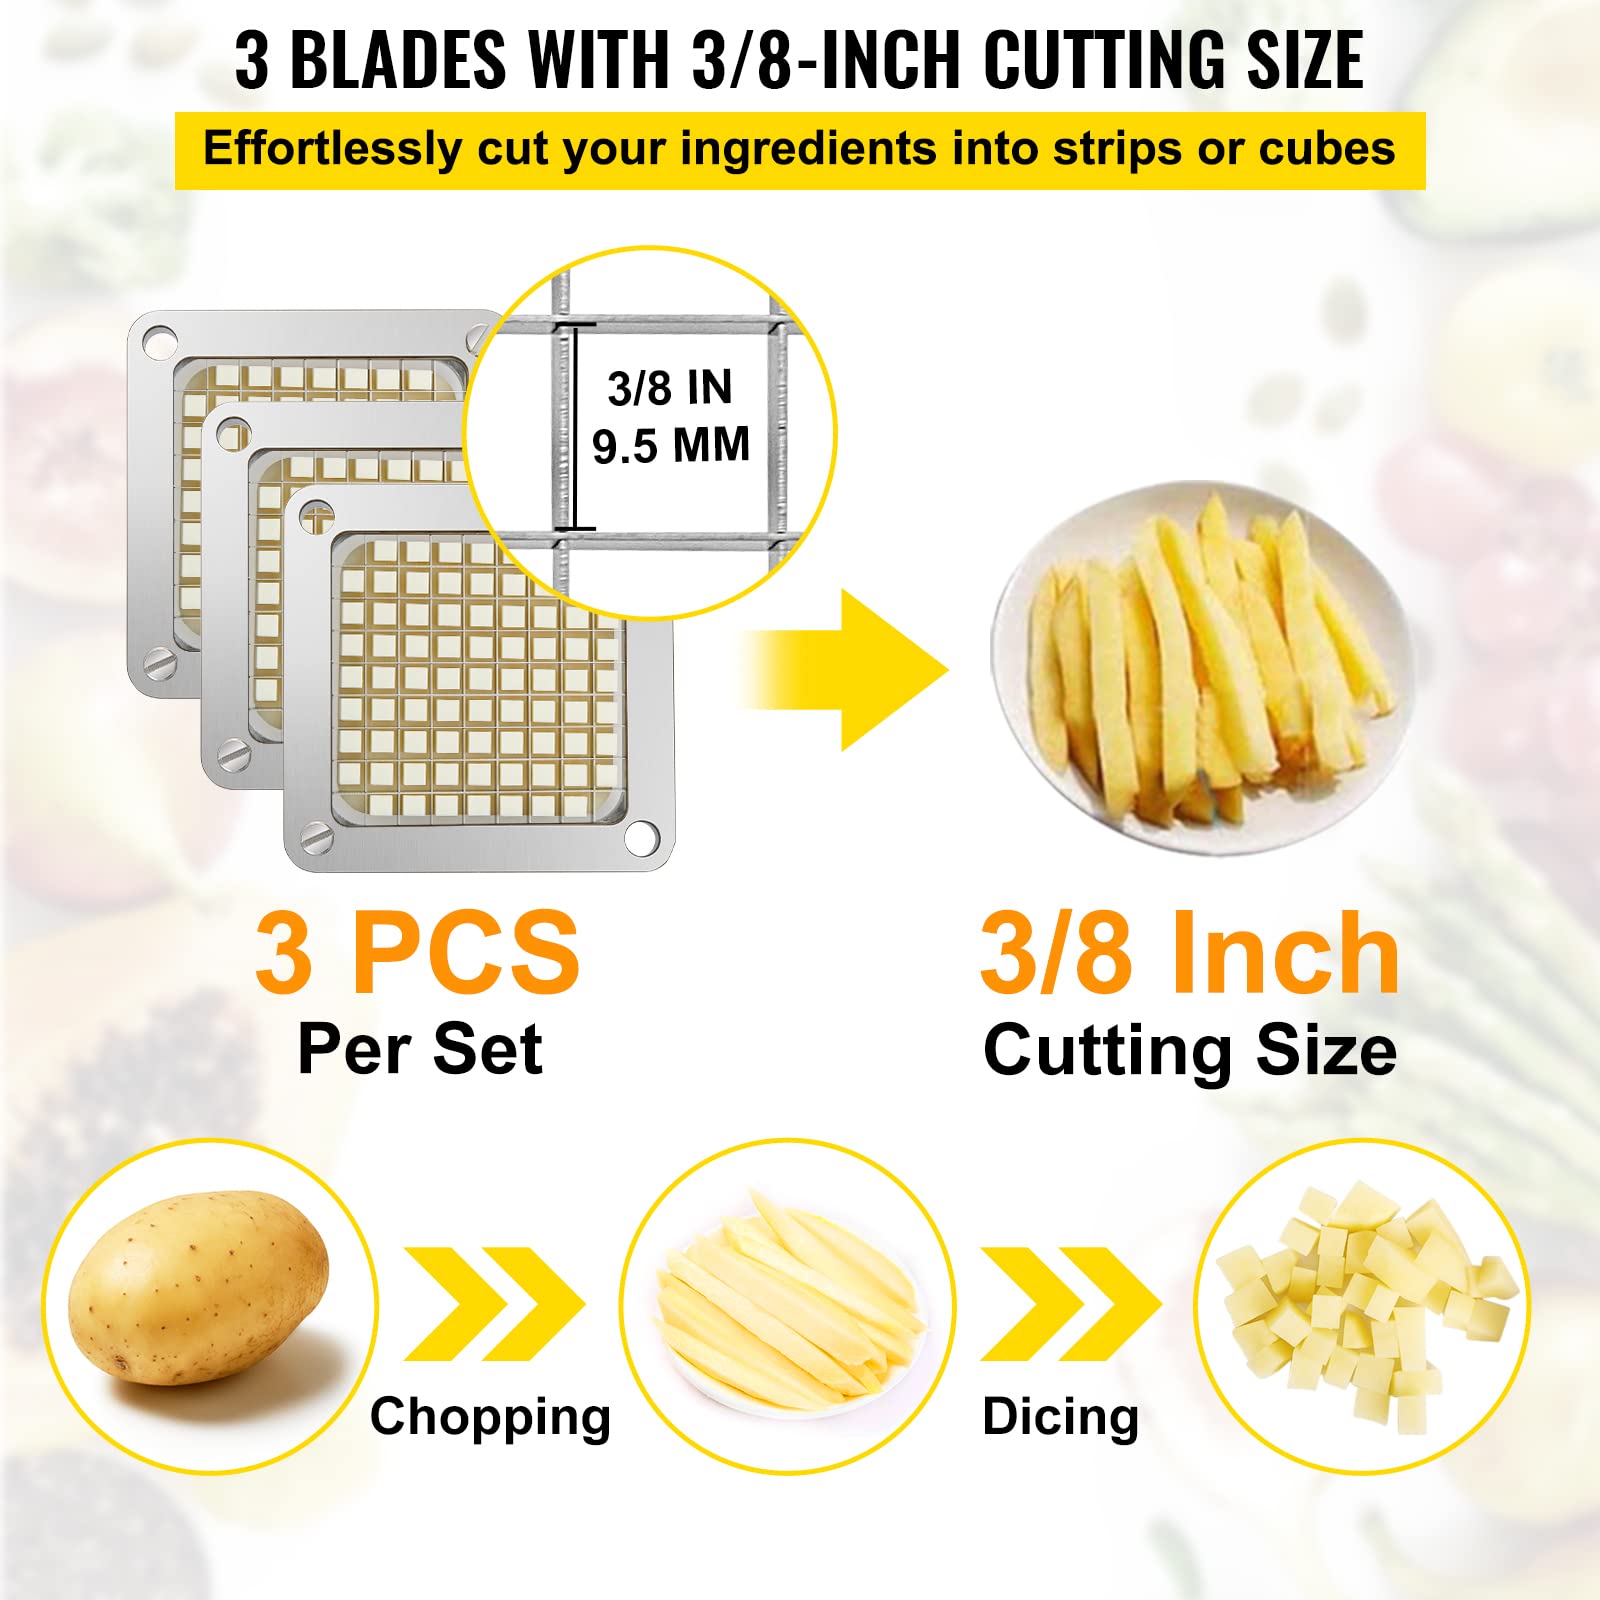 VEVOR Replacement Chopper Blade, 3/8 inch, 3 PCS French Fry Blade Assembly with 6 Extra Knives, Stainless Steel Dicer Parts and Push Block for Cutting Potatoes Carrots Onions Cucumbers Mushrooms